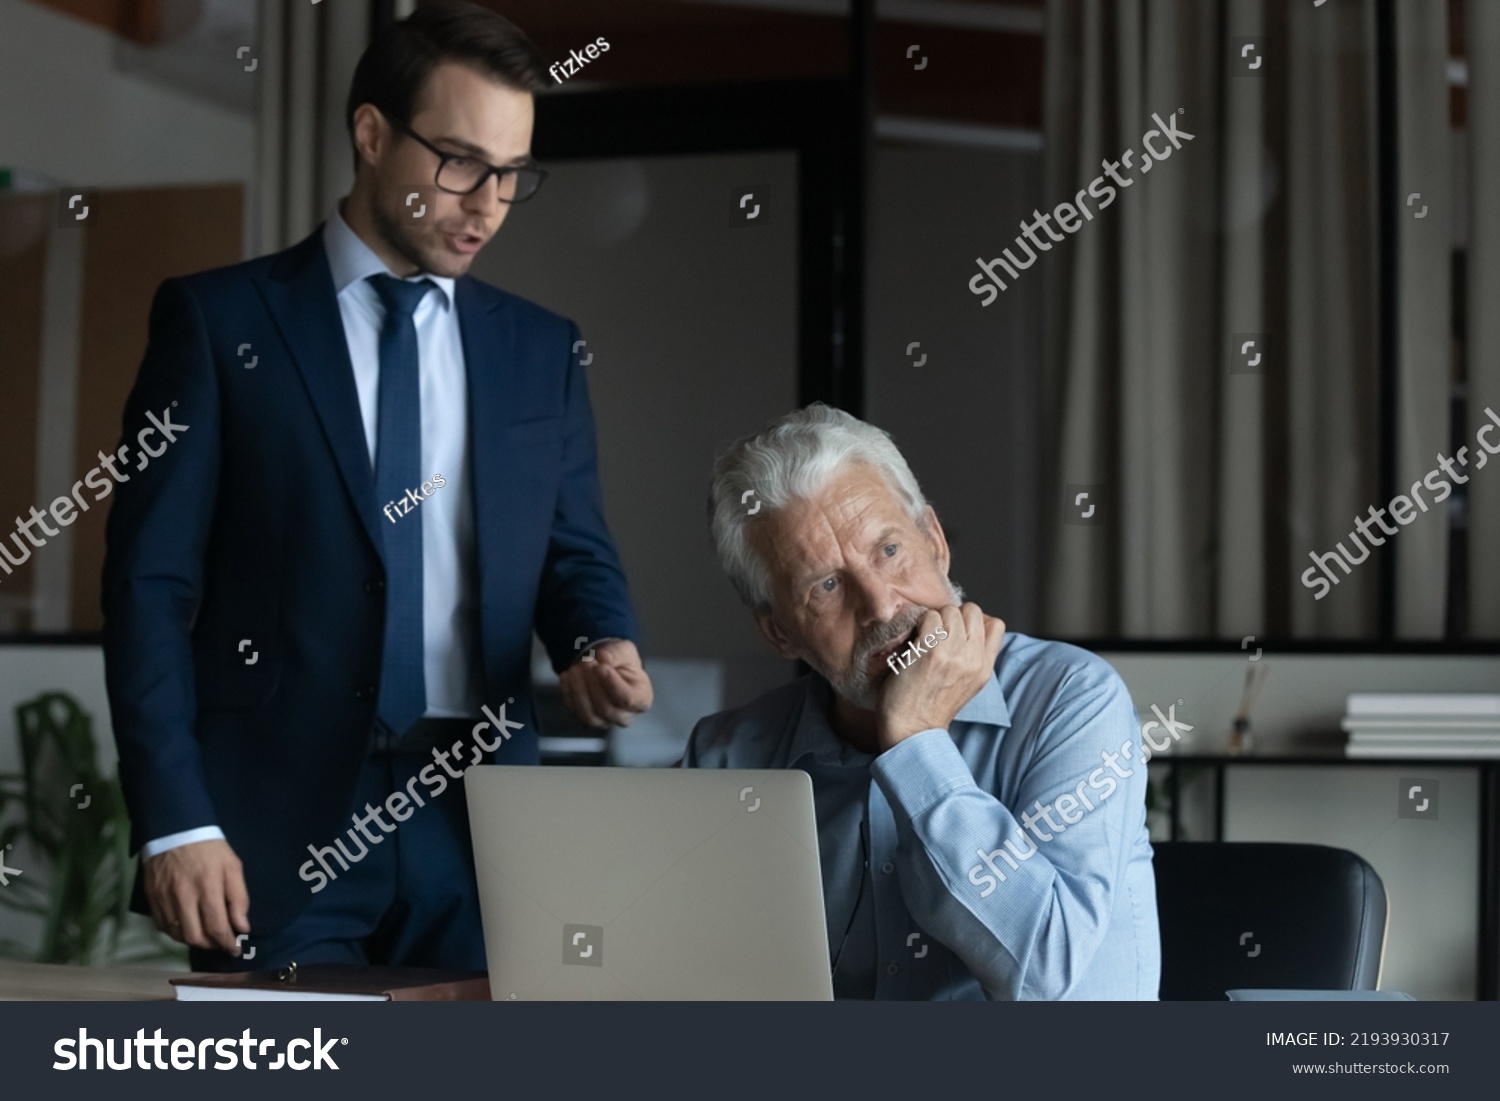 Angry businesswoman executive wearing glasses blaming scolding mature employee for business failure, bad work results, irritated dissatisfied boss lecturing upset senior worker, conflict concept #2193930317